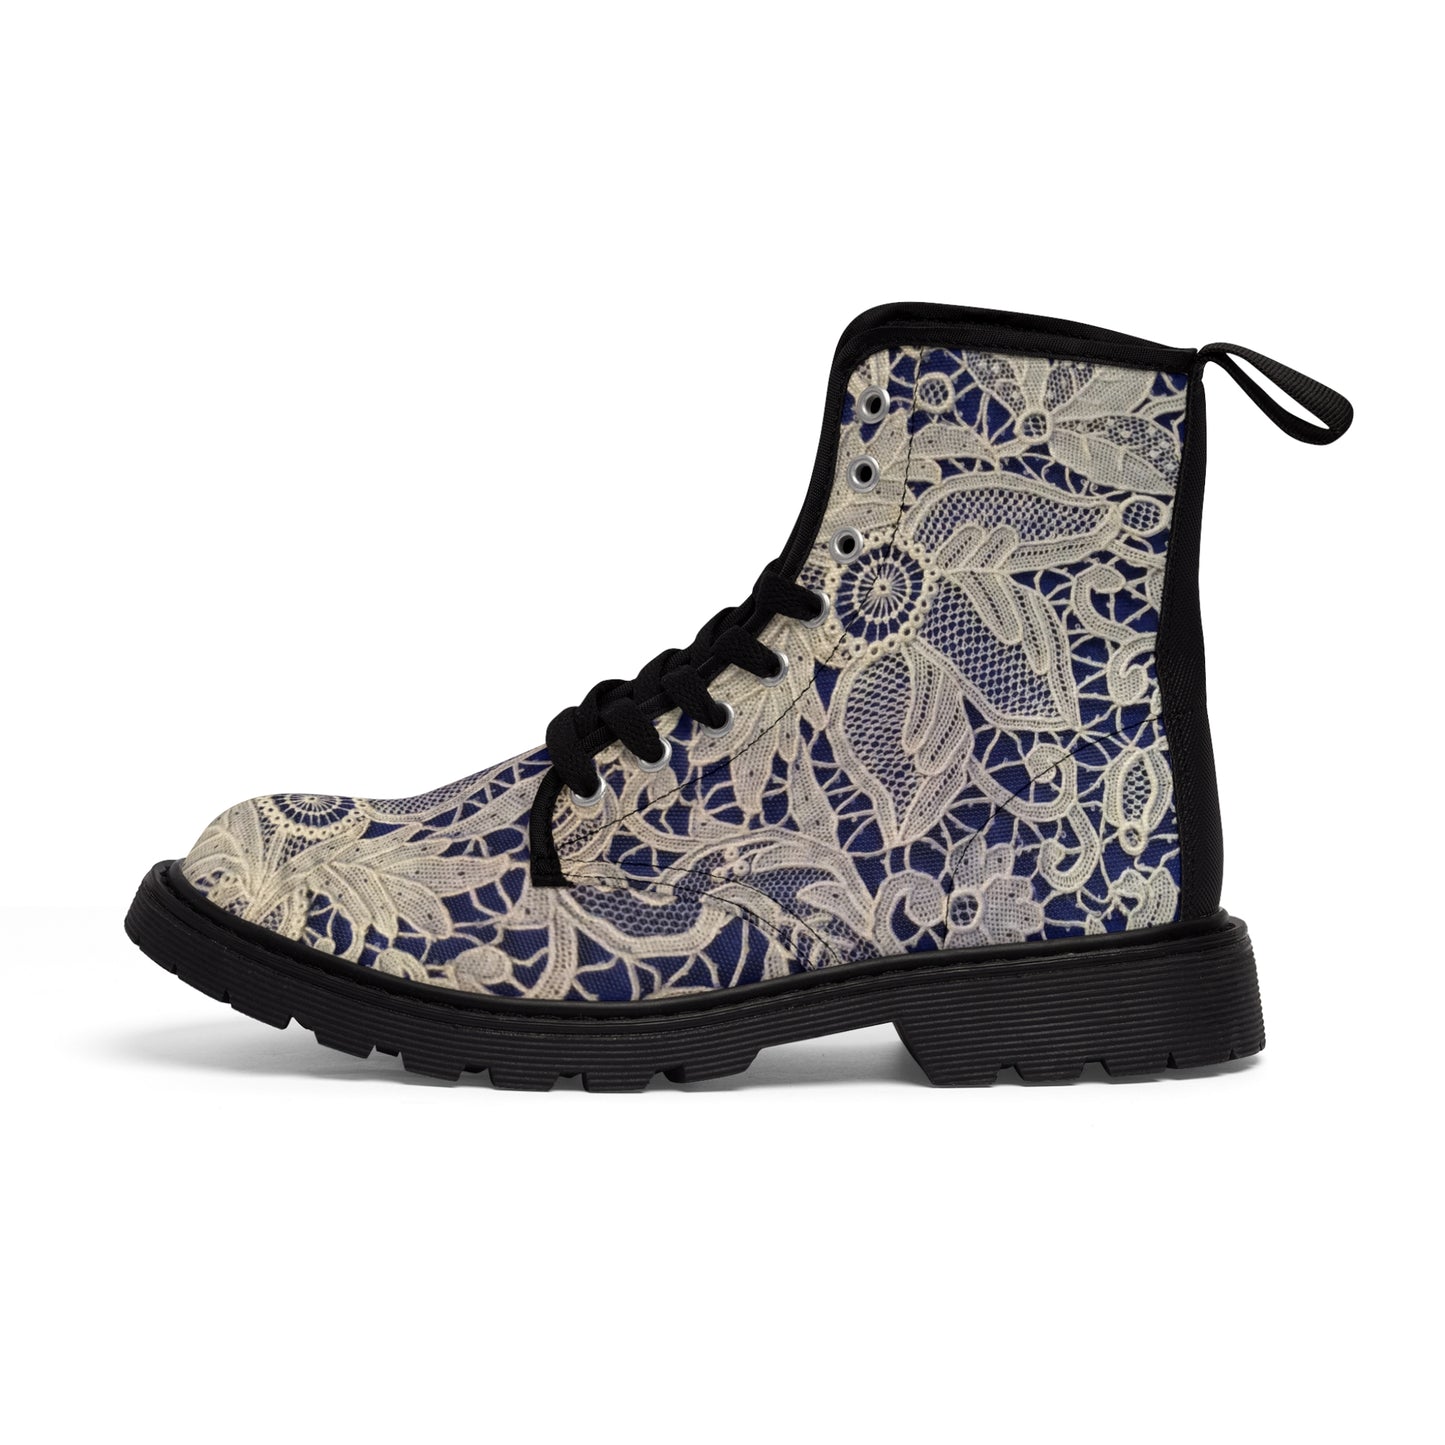 Golden and Blue - Inovax Men's Canvas Boots